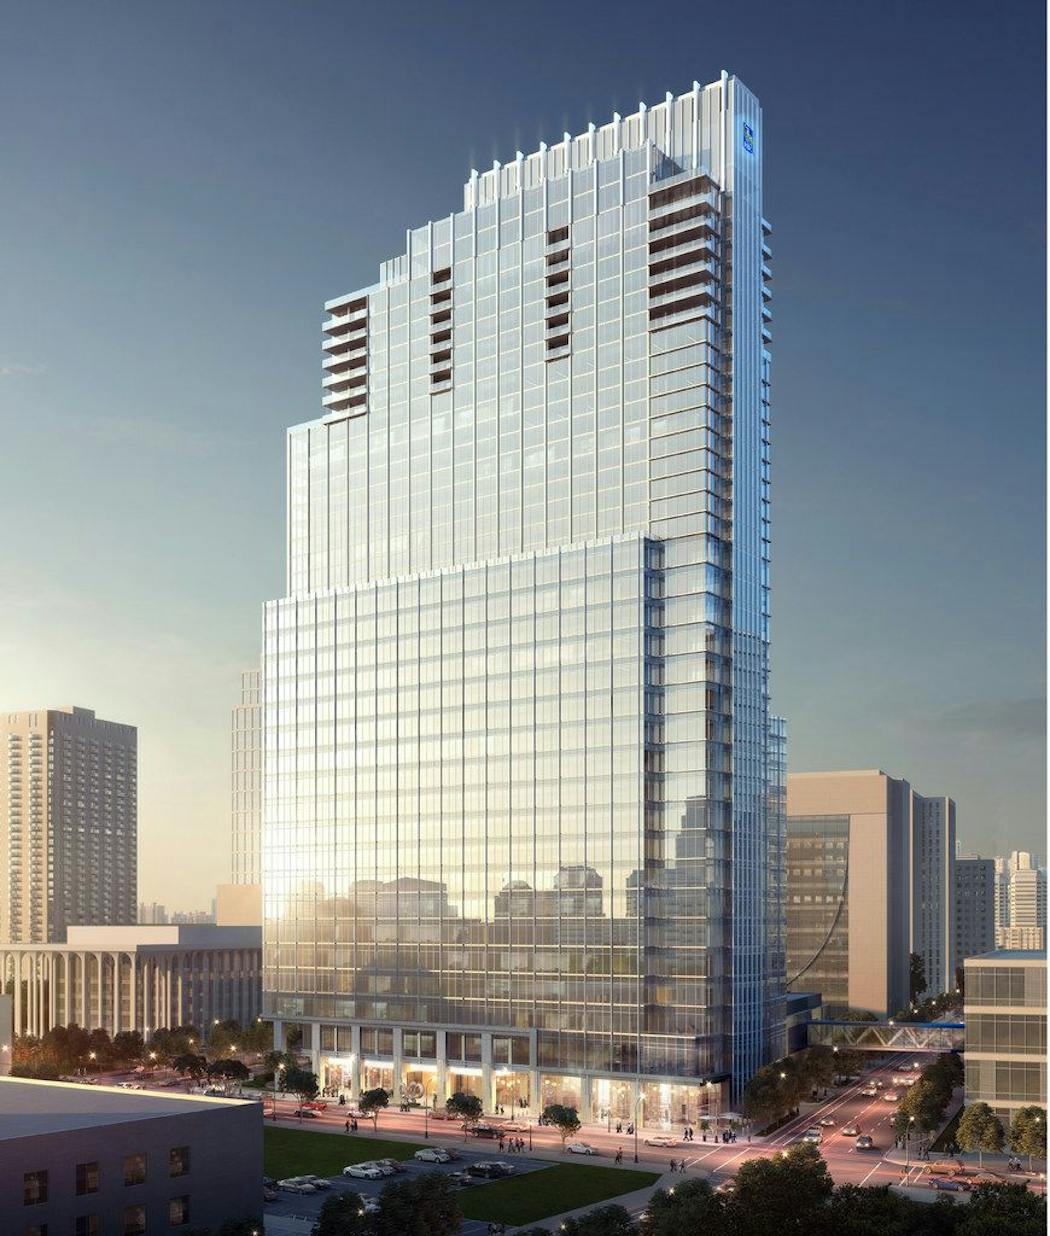 An earlier rendering of the tower, dated 2019.